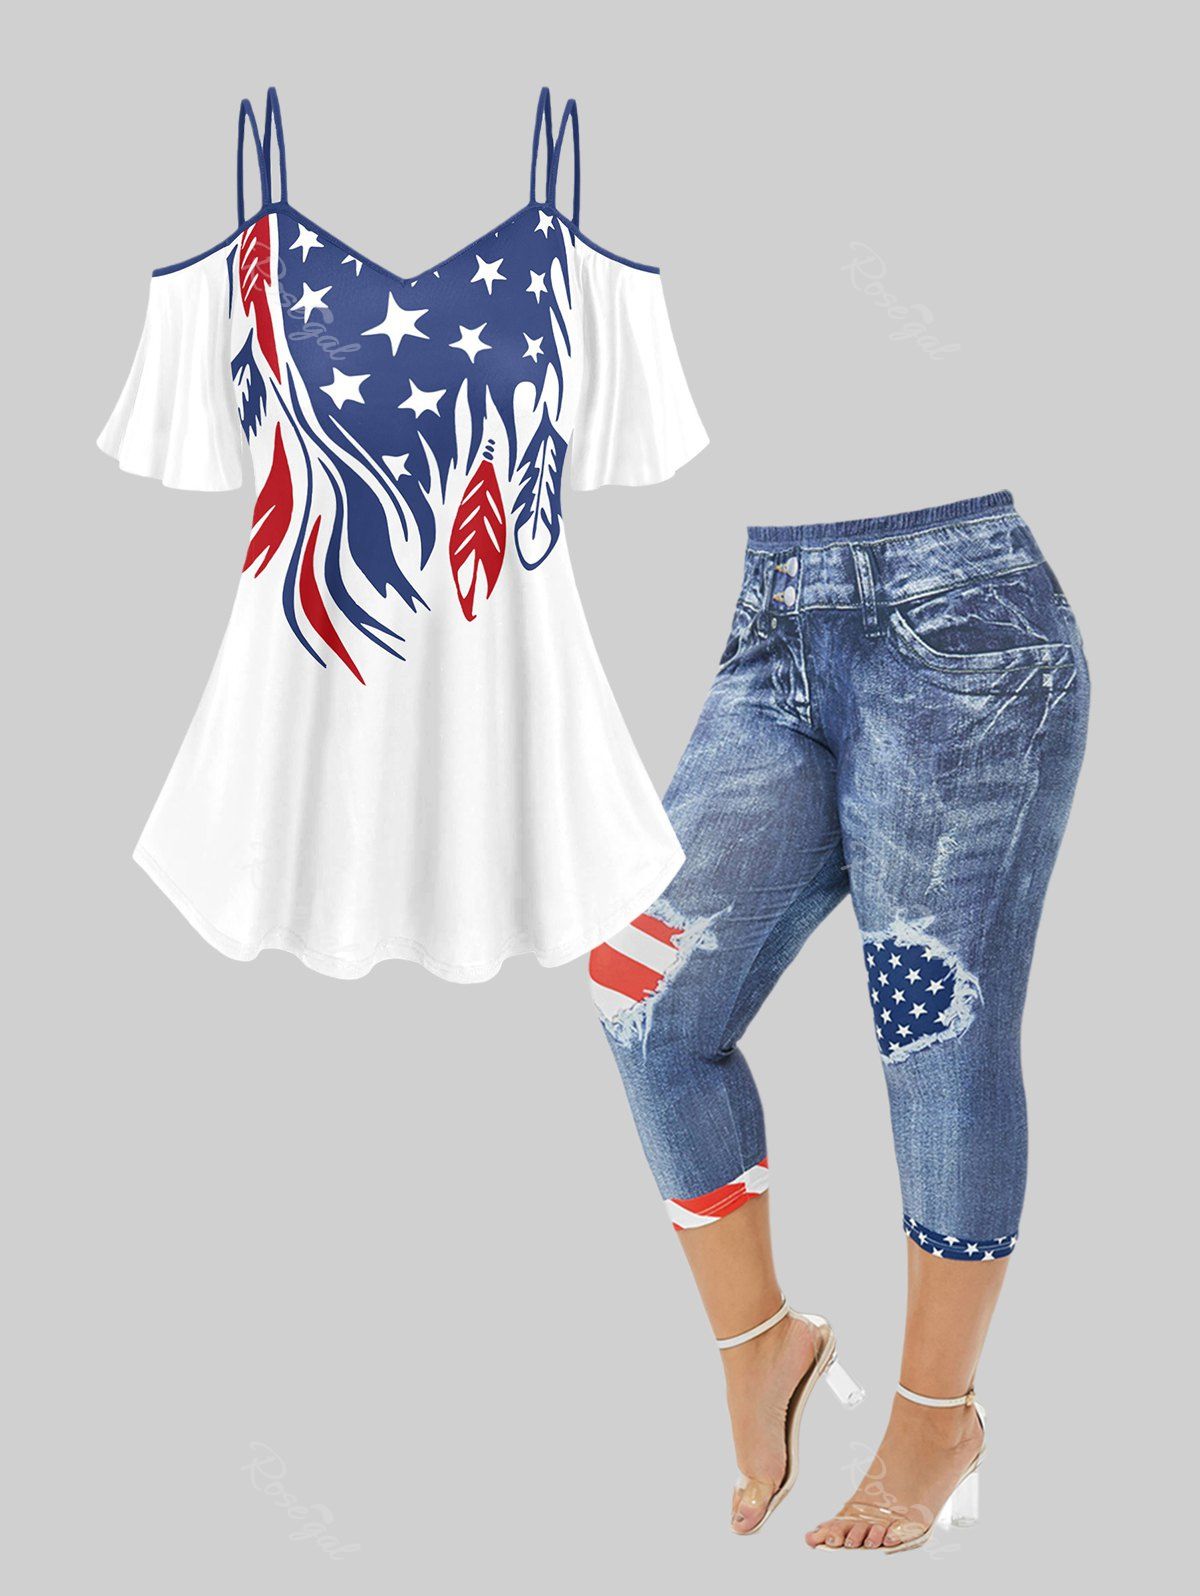 Chic Plus Size Patriotic American Flag Printed Cold Shoulder Tee and American Flag 3D Printed Skinny Capri Plus Size Jeggings Outfit Bundle  